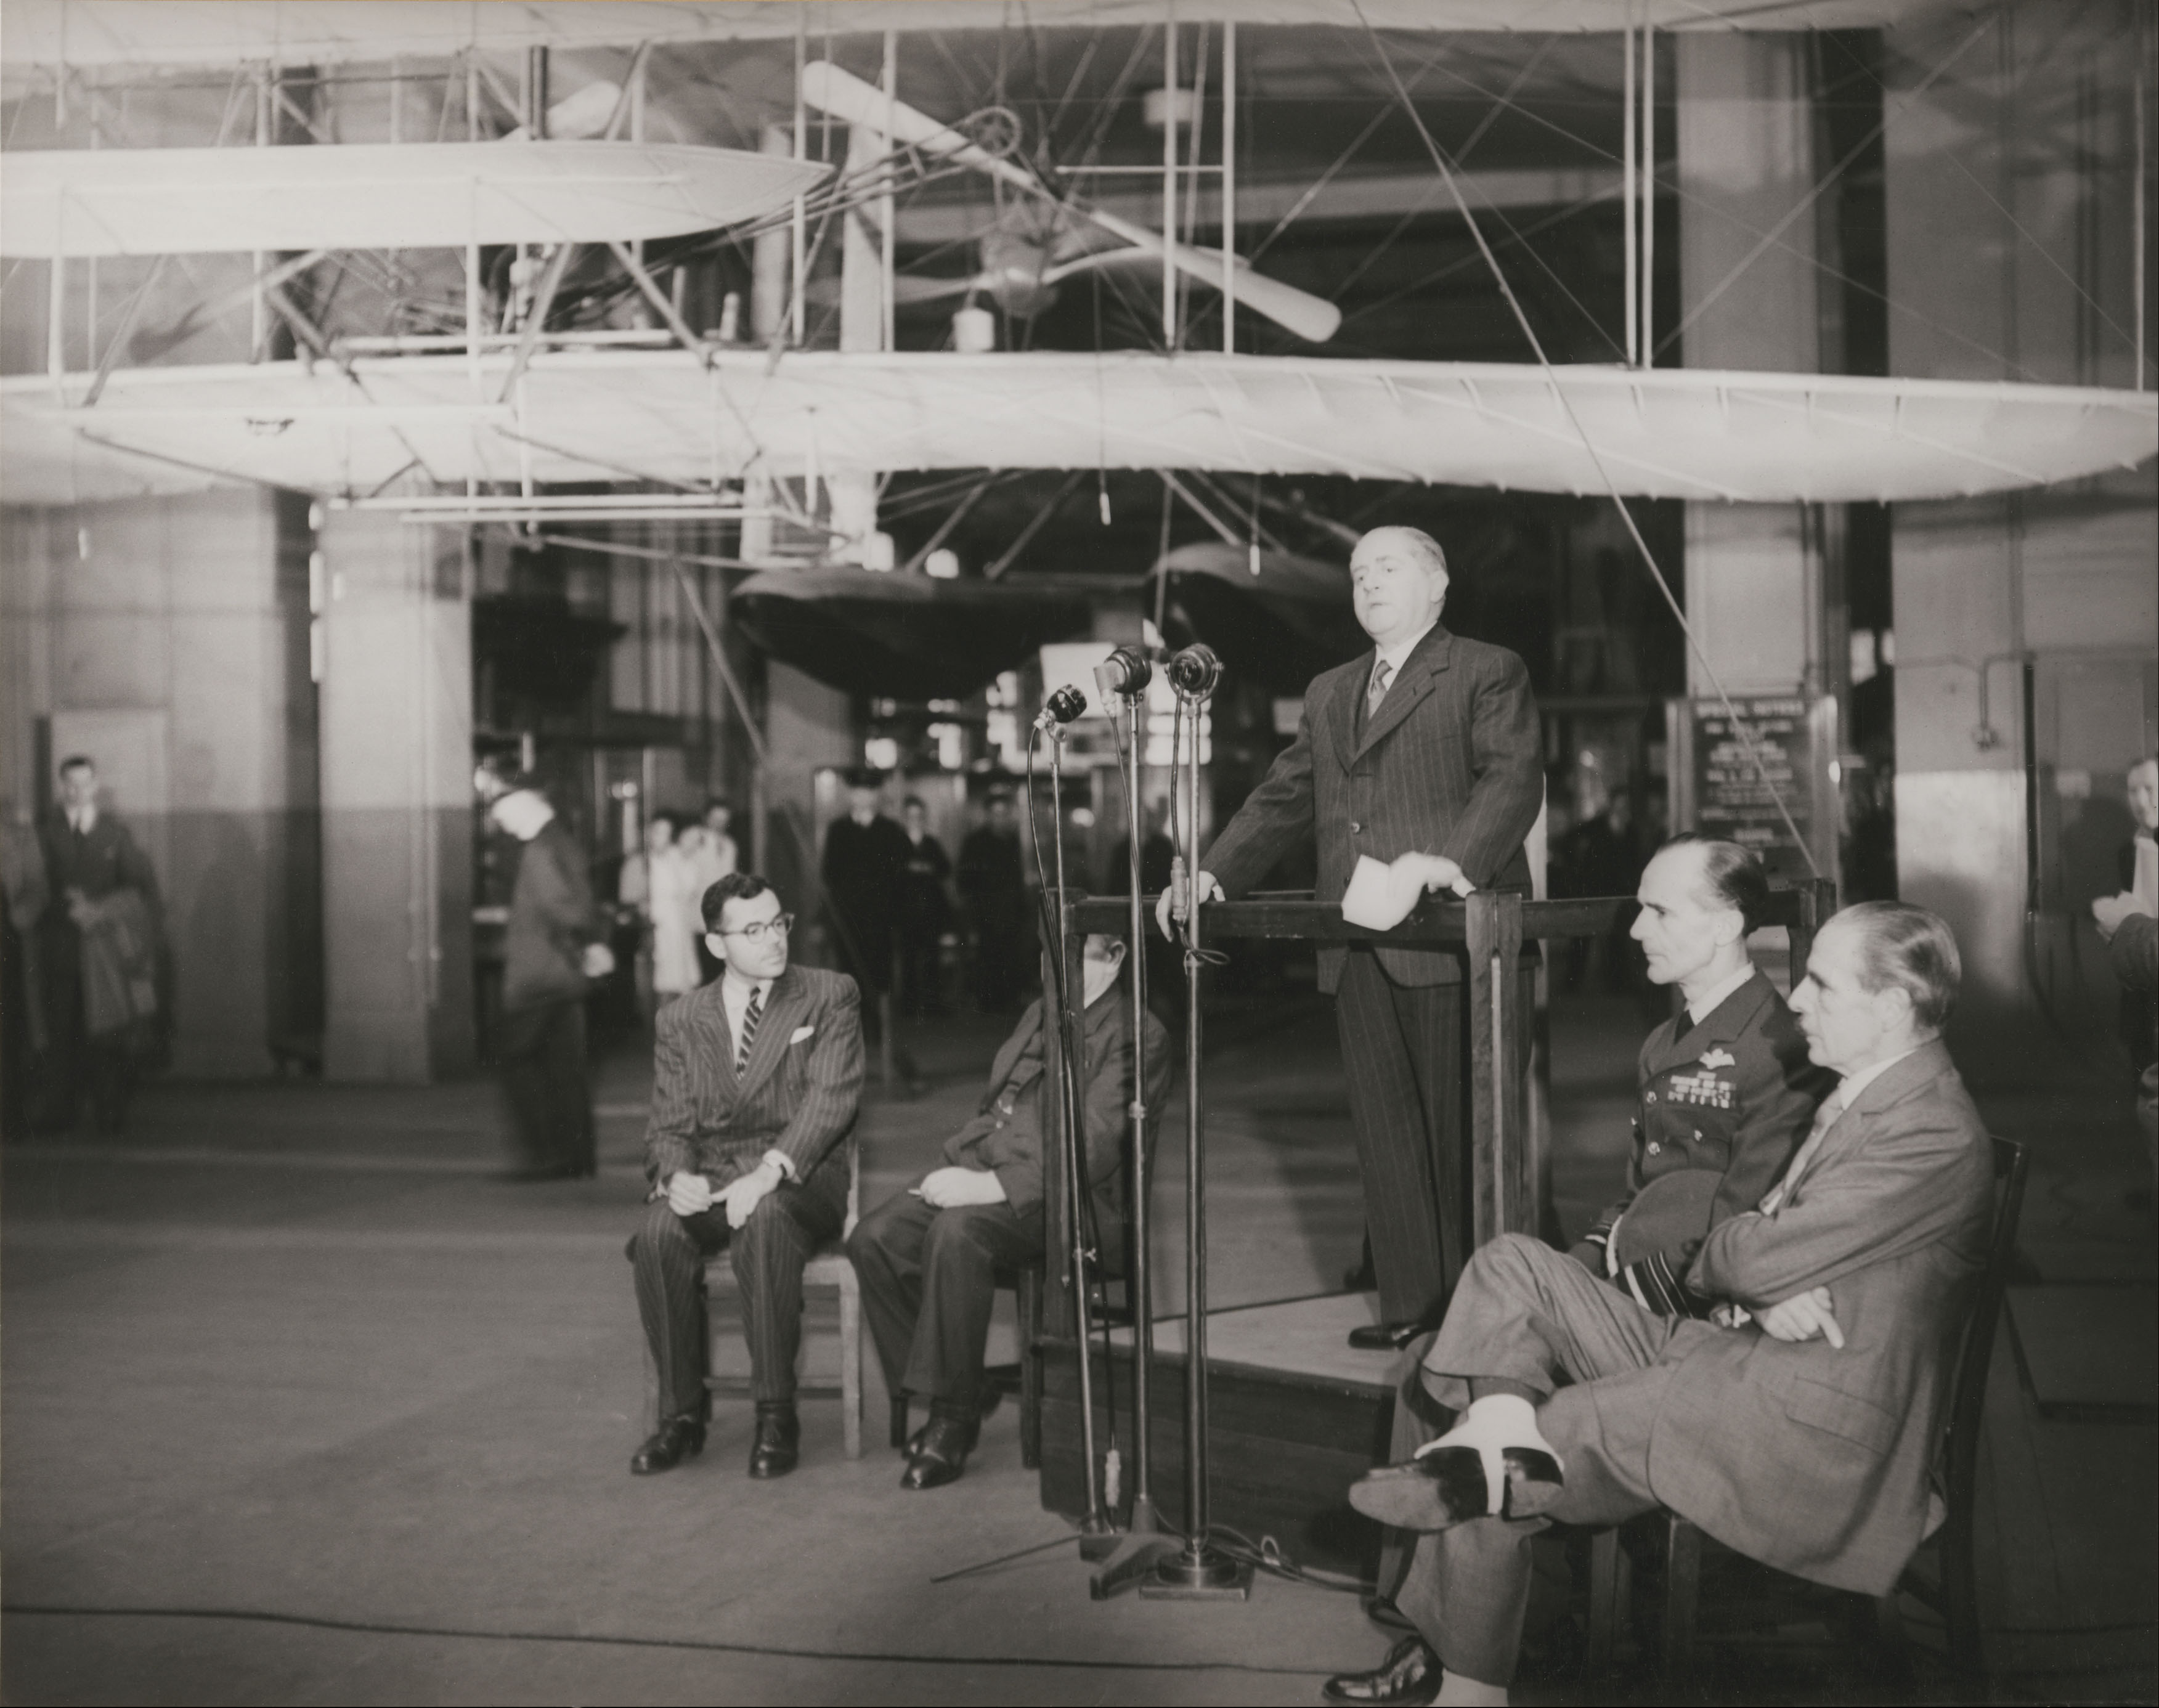 Ceremony marking the return of the Wright Flyer, Science Museum, 1948.